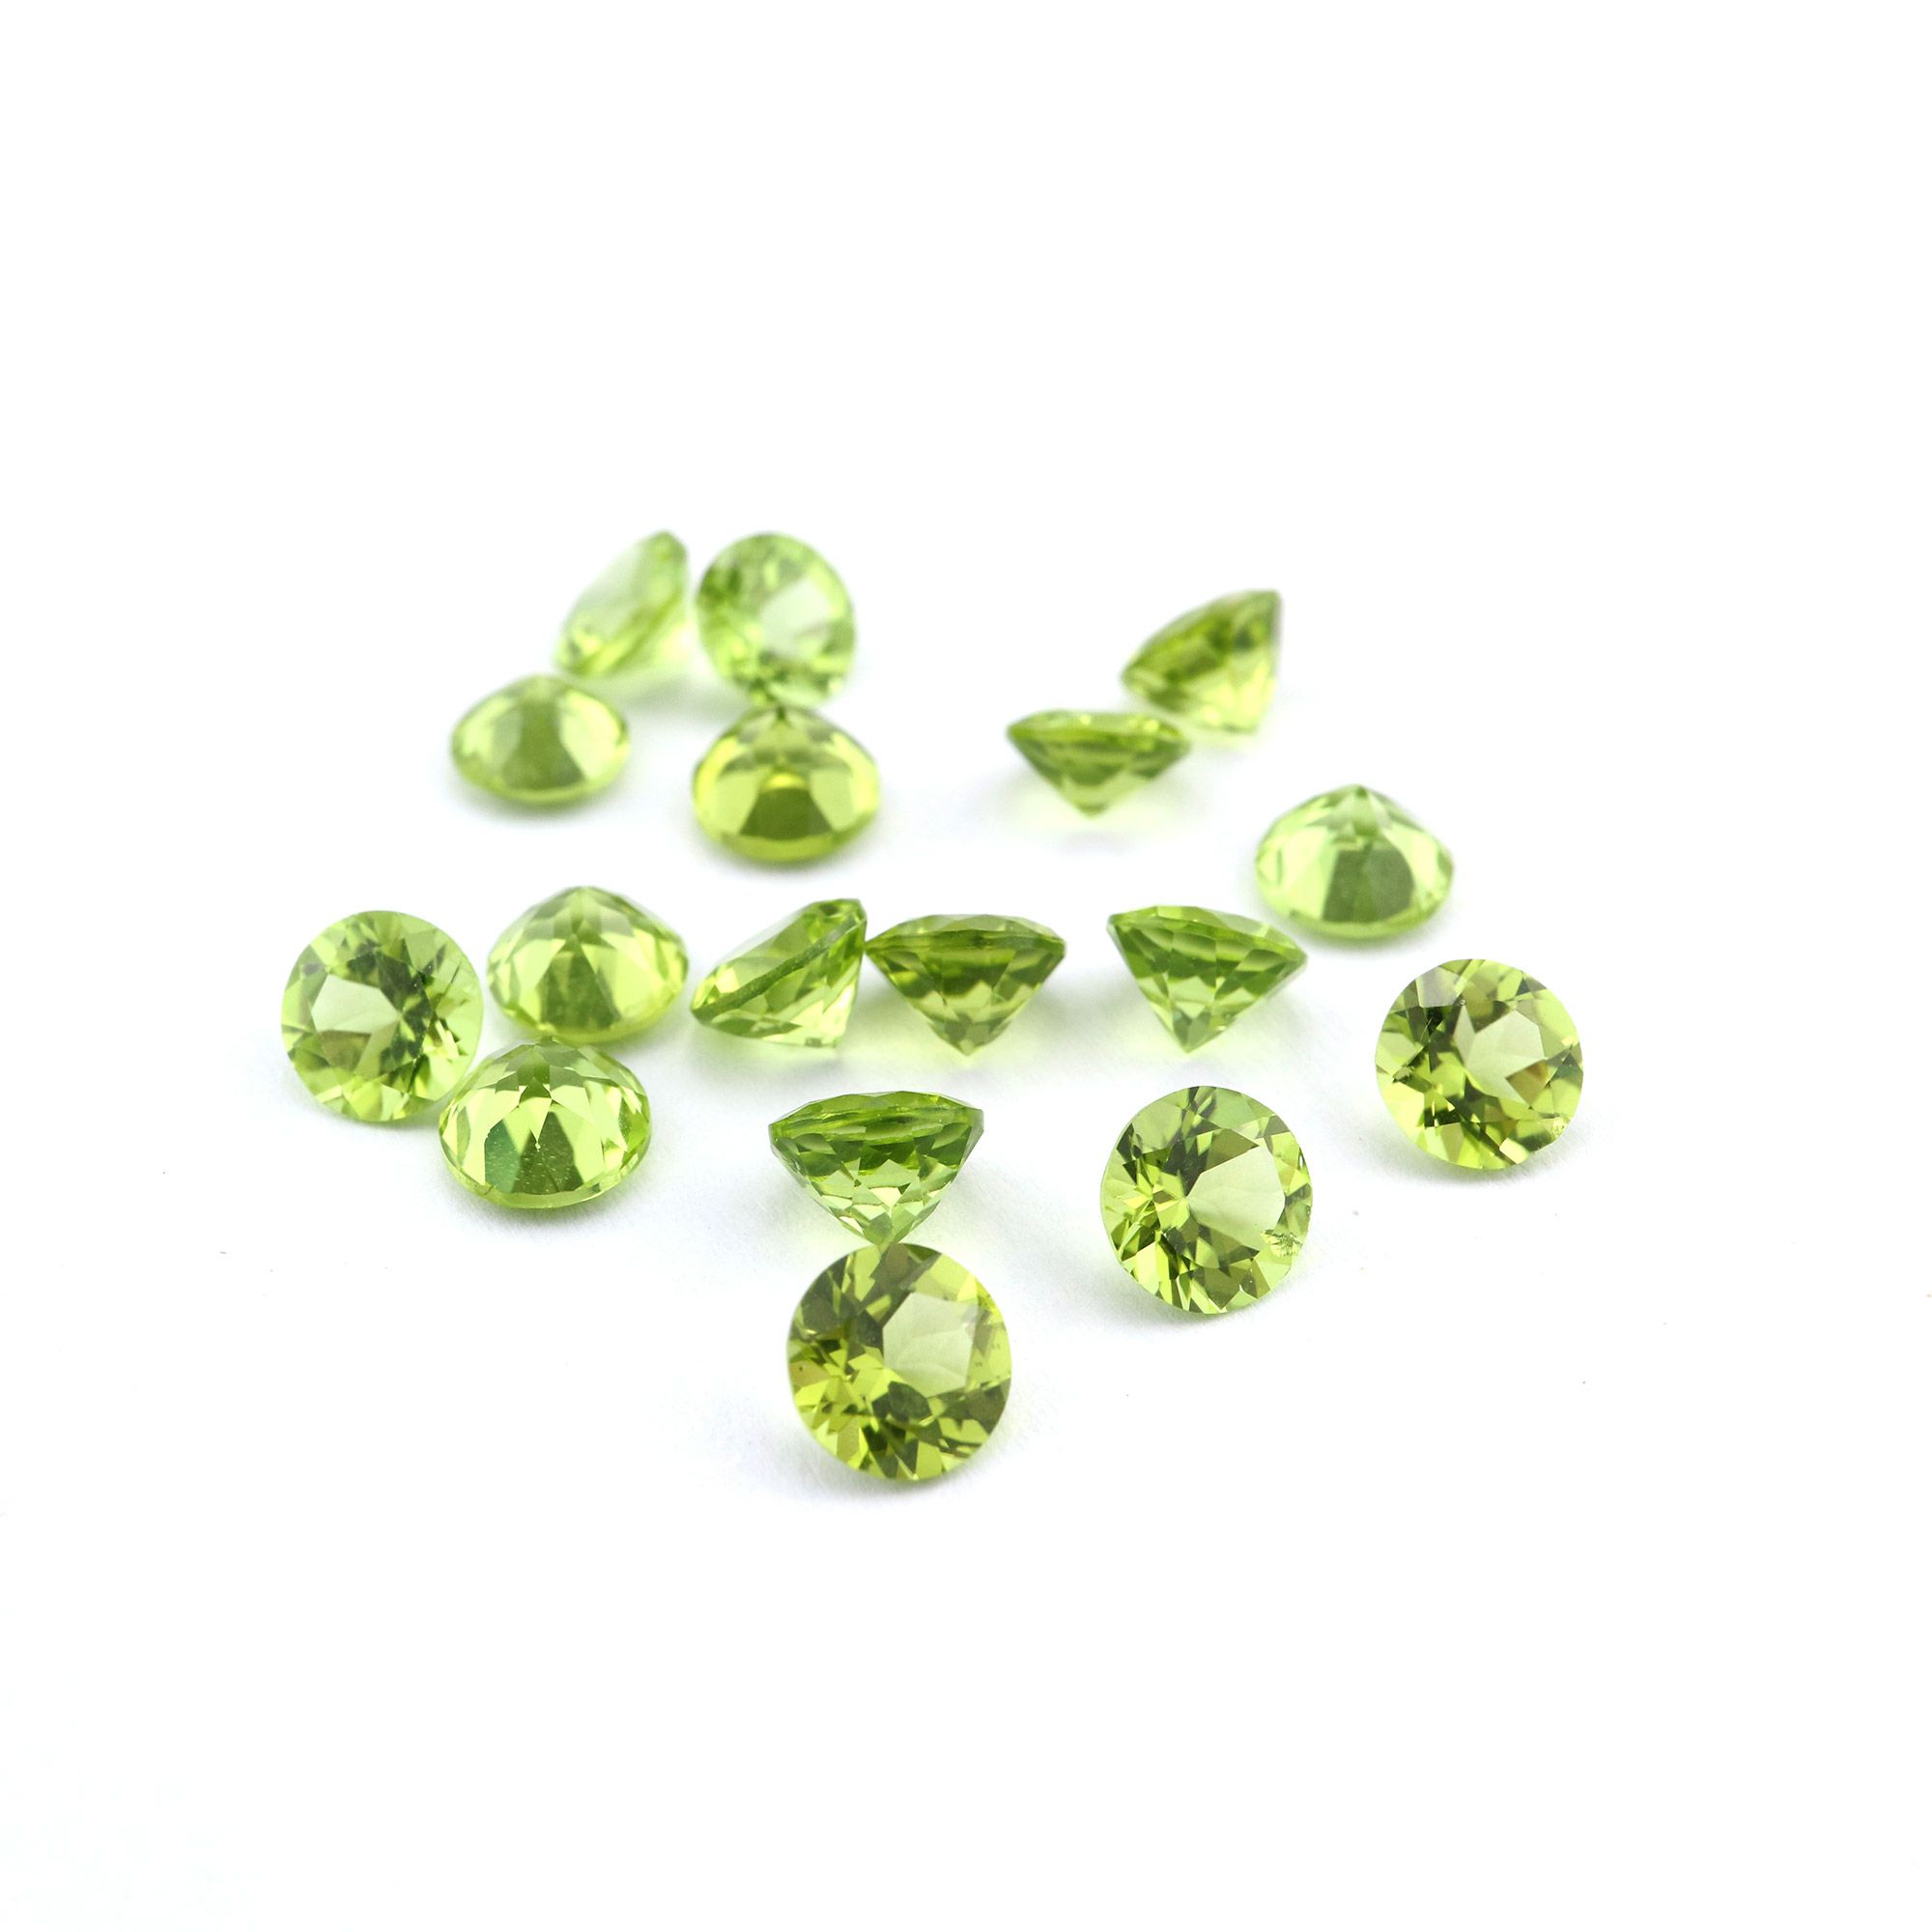 5Pcs 1-8MM Round Green Peridot August Birthstone Faceted Cut Loose Gemstone Natural Semi Precious Stone DIY Jewelry Supplies 4110165 - Click Image to Close